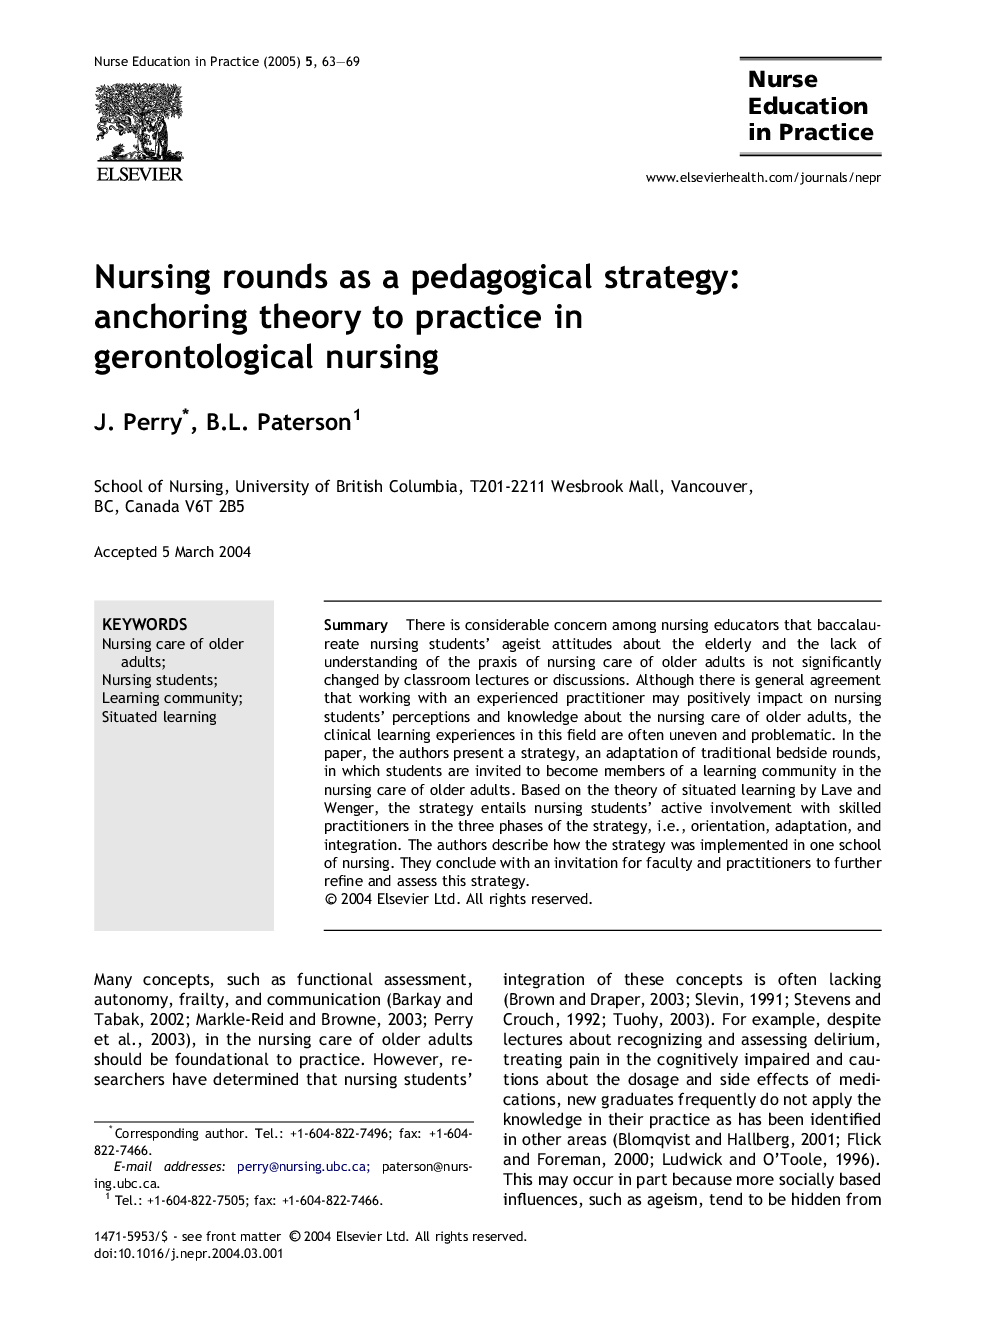 Nursing rounds as a pedagogical strategy: anchoring theory to practice in gerontological nursing